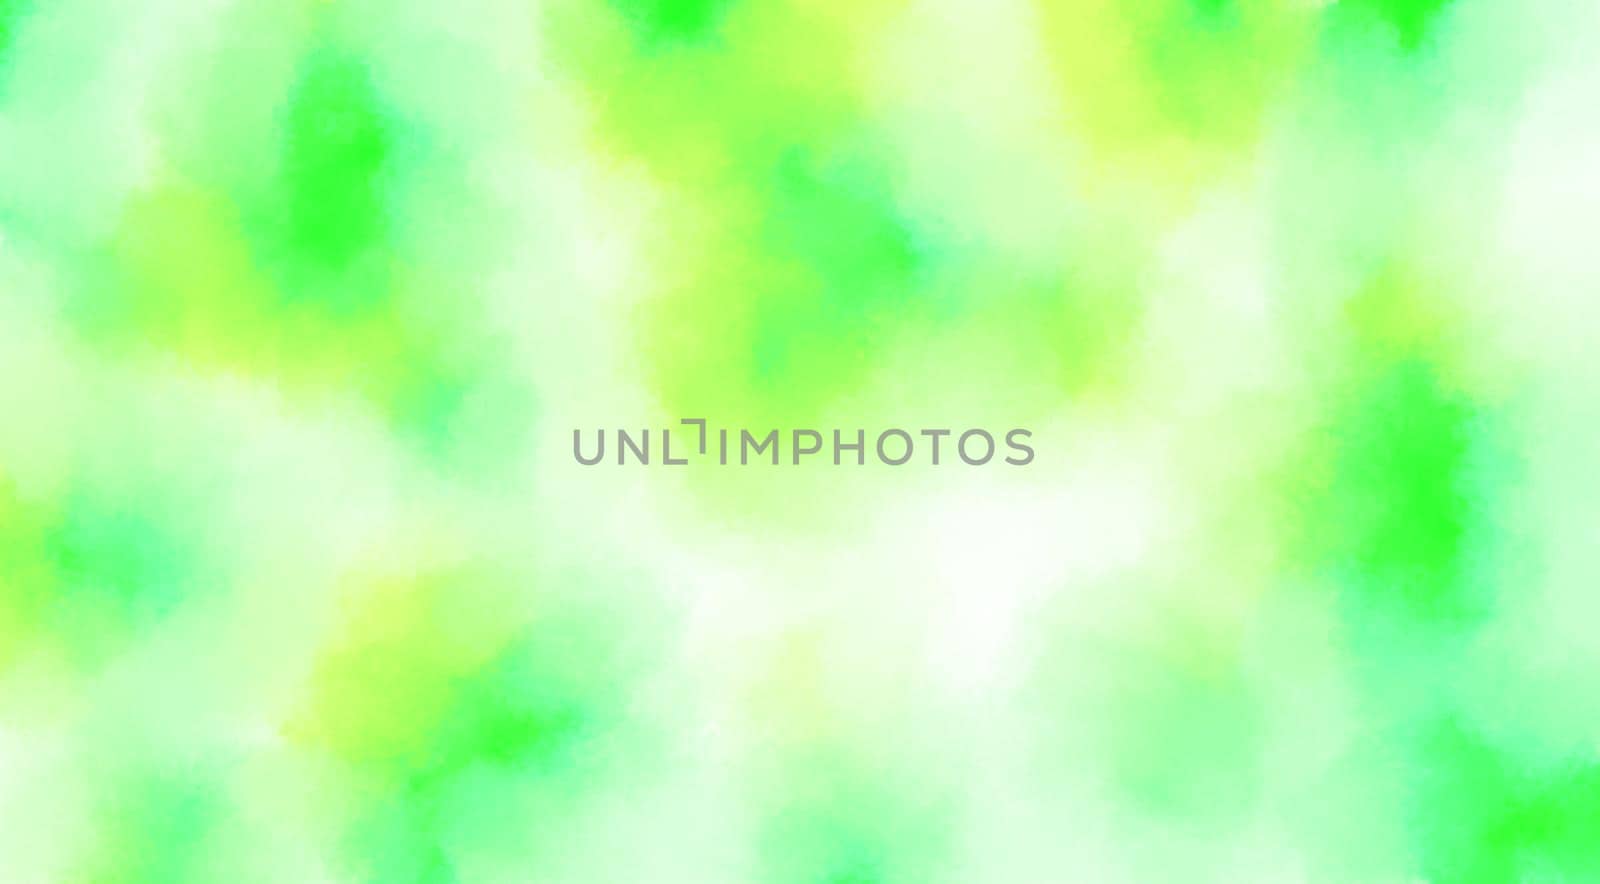 Abstract modern background with bright green yellow color gradient. Texture distressed vintage grunge design texture background